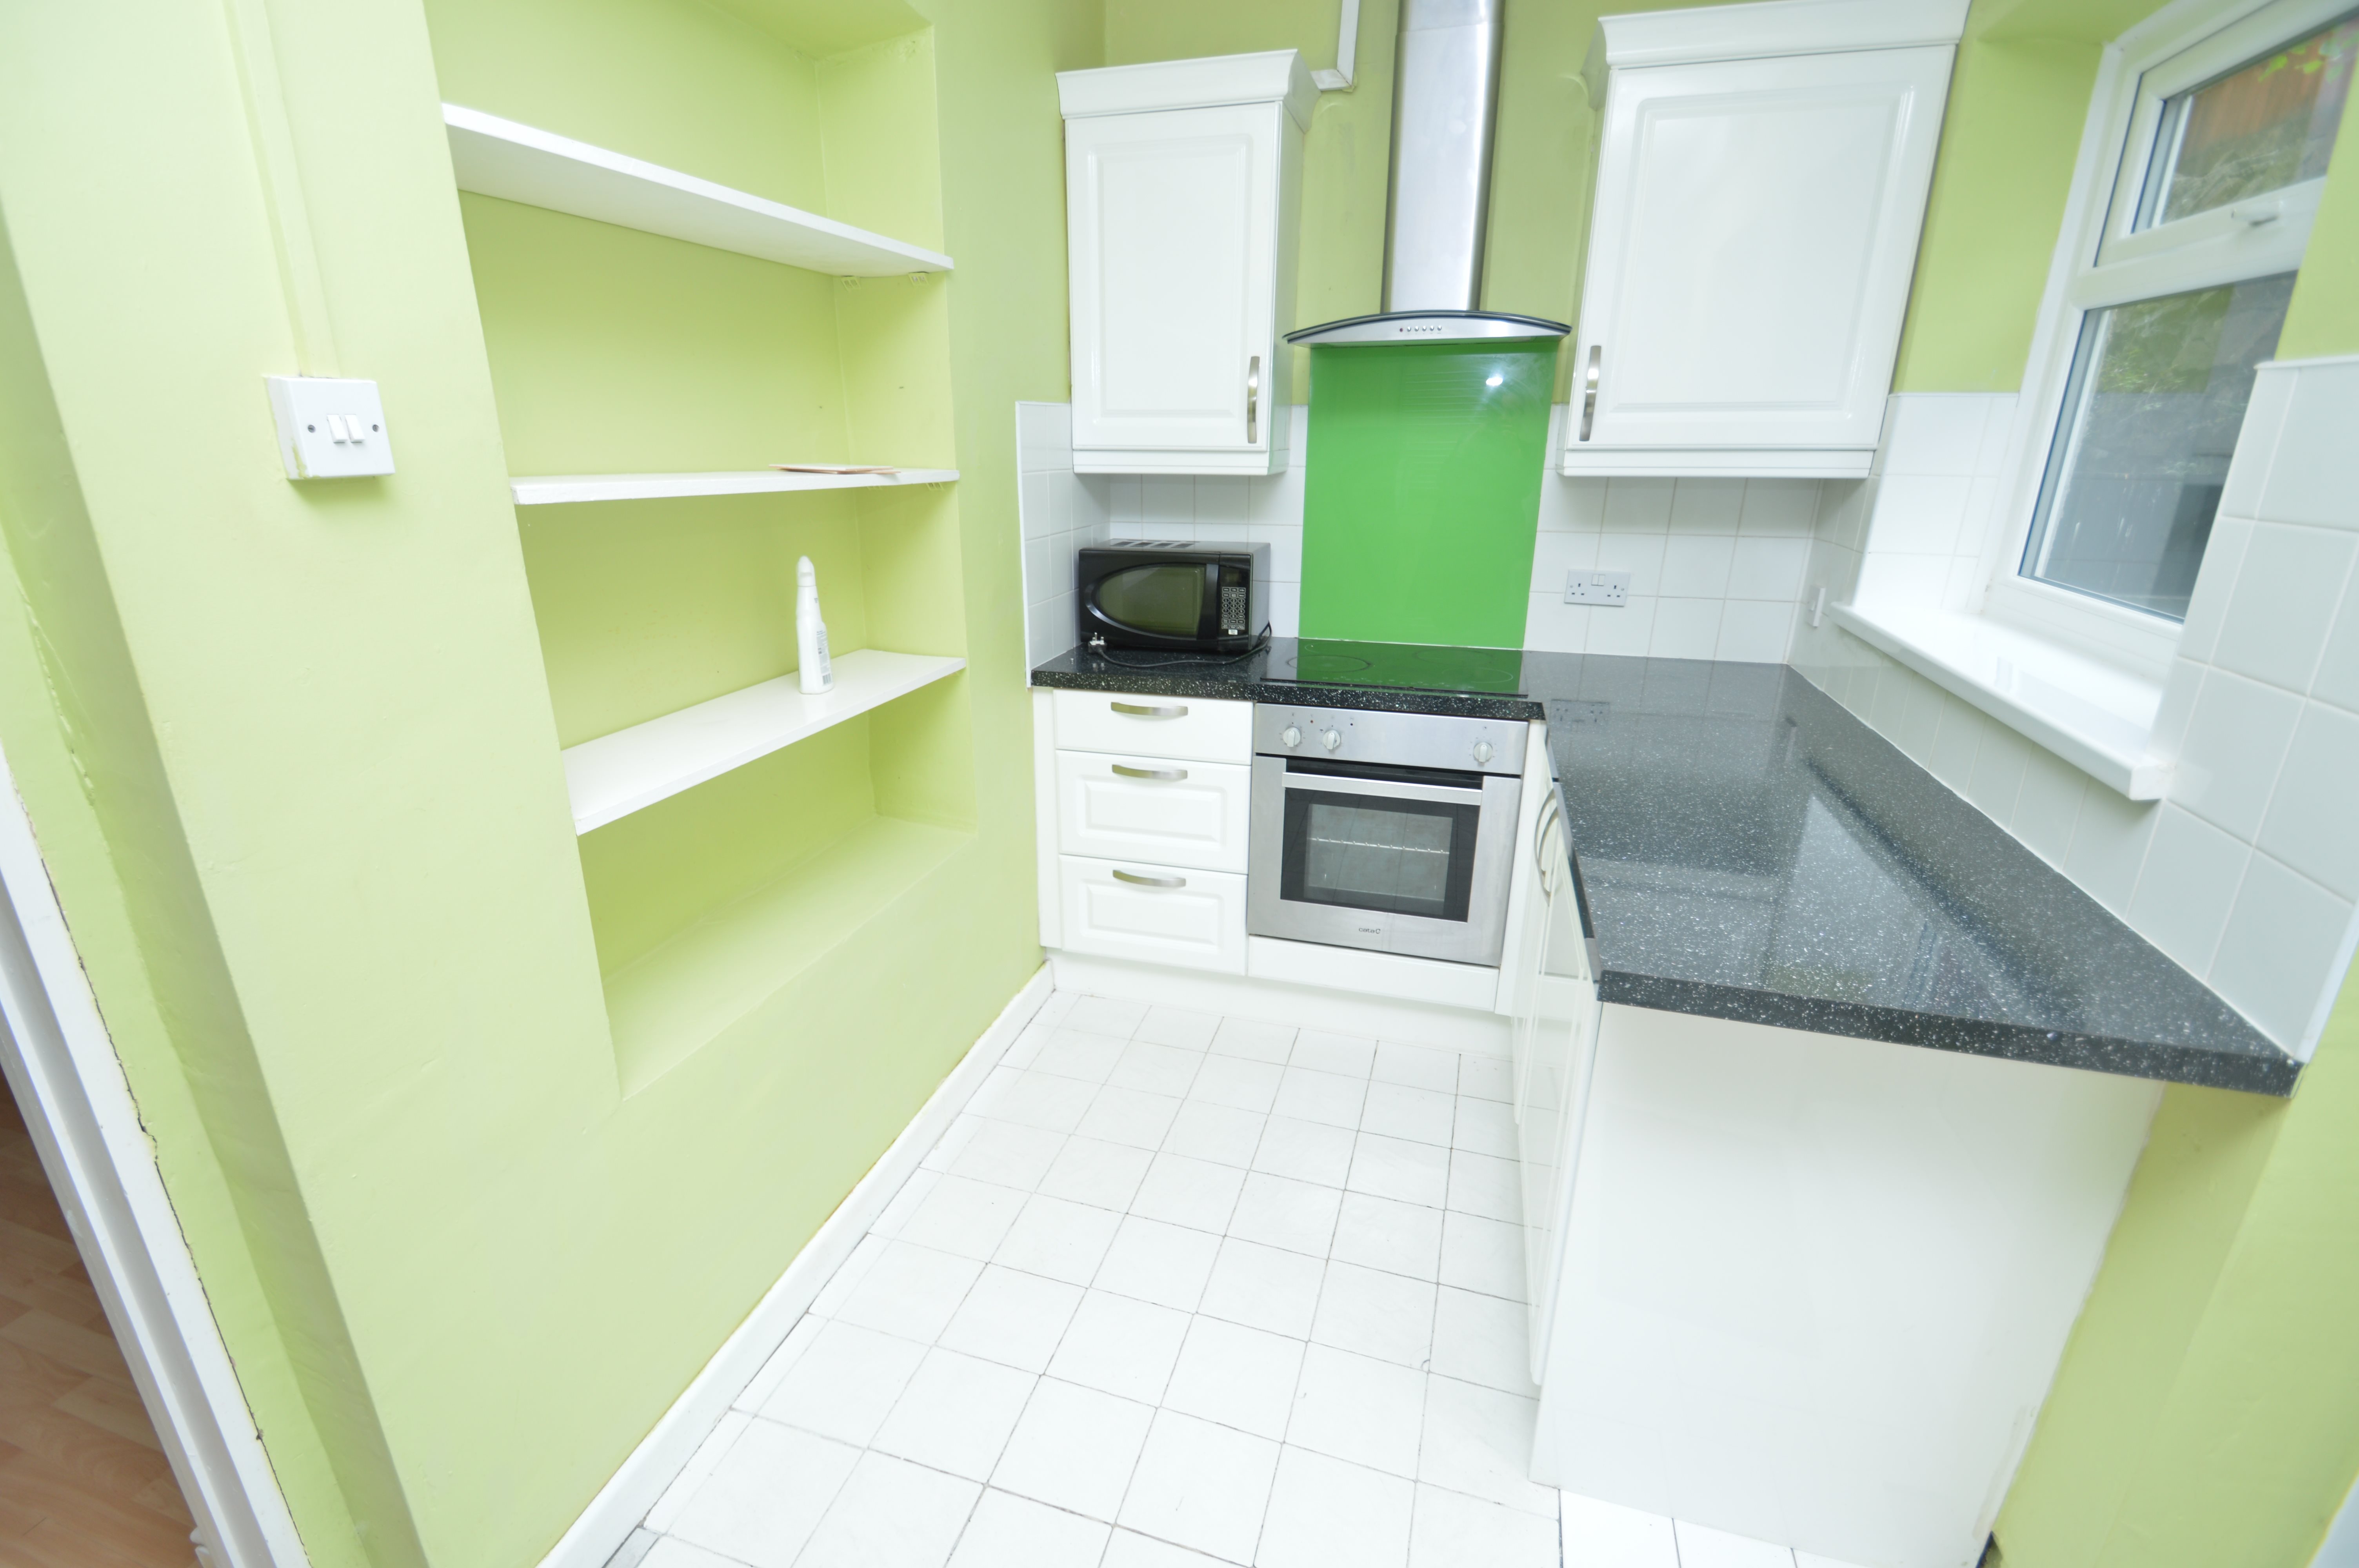 2 bed house to rent in Rickard Terrace, Pontypridd  - Property Image 1